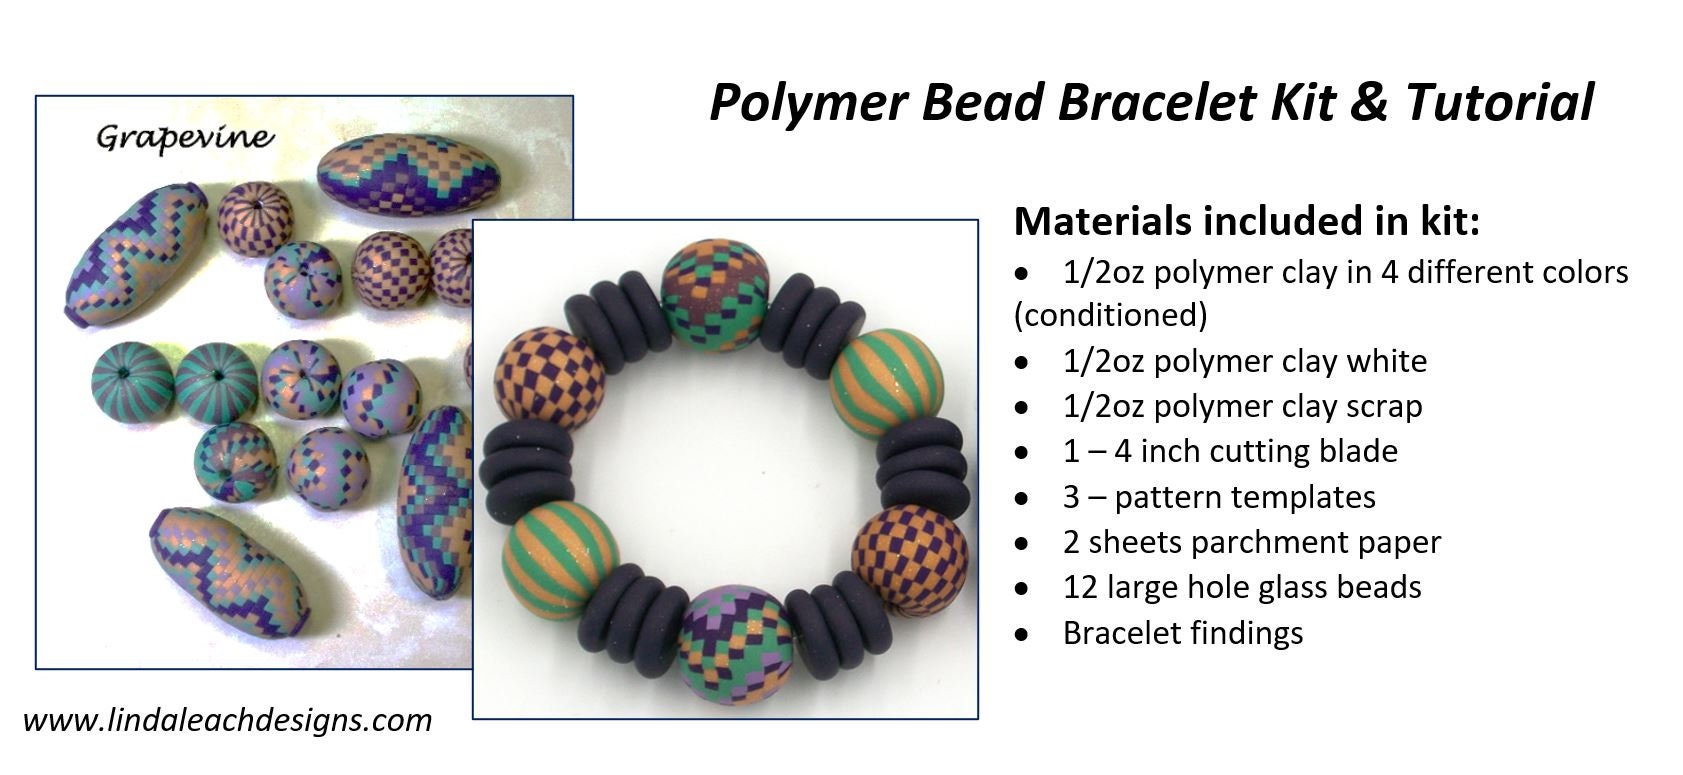 Polymer Clay Bead Bracelet Kit & Tutorial©, All Materials Included,  Conditioned Clay, Templates, Instructions, Grapevine Colors 